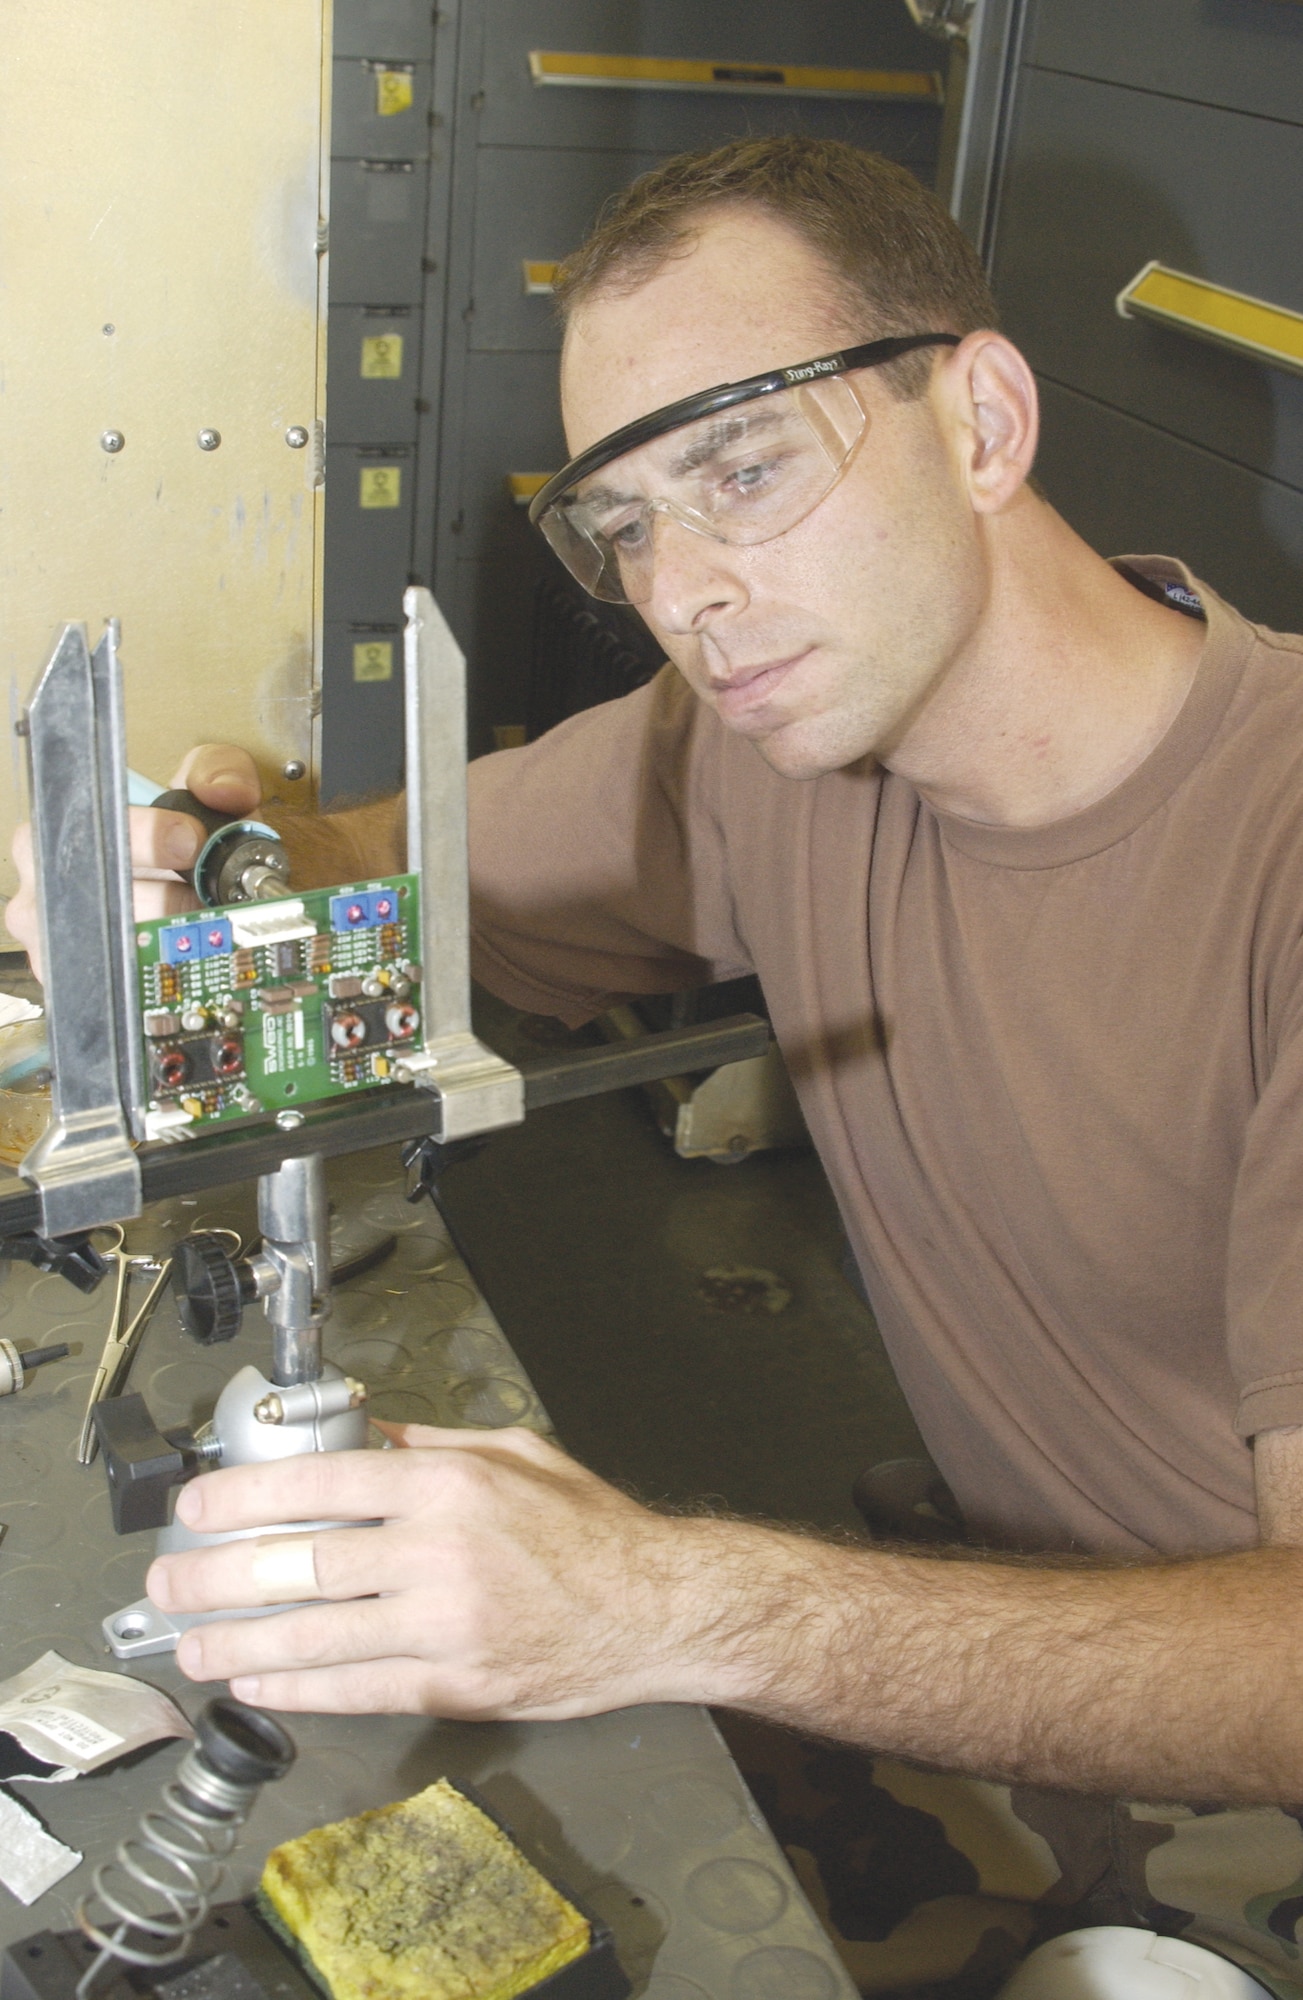 Staff Sgt. Scott Campbell, 266th Range Squadron ground radar technician, solders a transistor on a circuit card for the Multiple Threat Emitter System at Andersen Air Force Base, Guam. The MUTES offers B-52 electronic warfare officers of the 23rd Expeditionary Bomb Squadron training opportunities to quickly identify simulated threats to their aircraft, such as surface-to-air missiles. Sergeant Campbell is deployed from Mountain Home Air Force Base, Idaho. (U.S. Air Force photo/Staff Sgt. Eric Petosky)